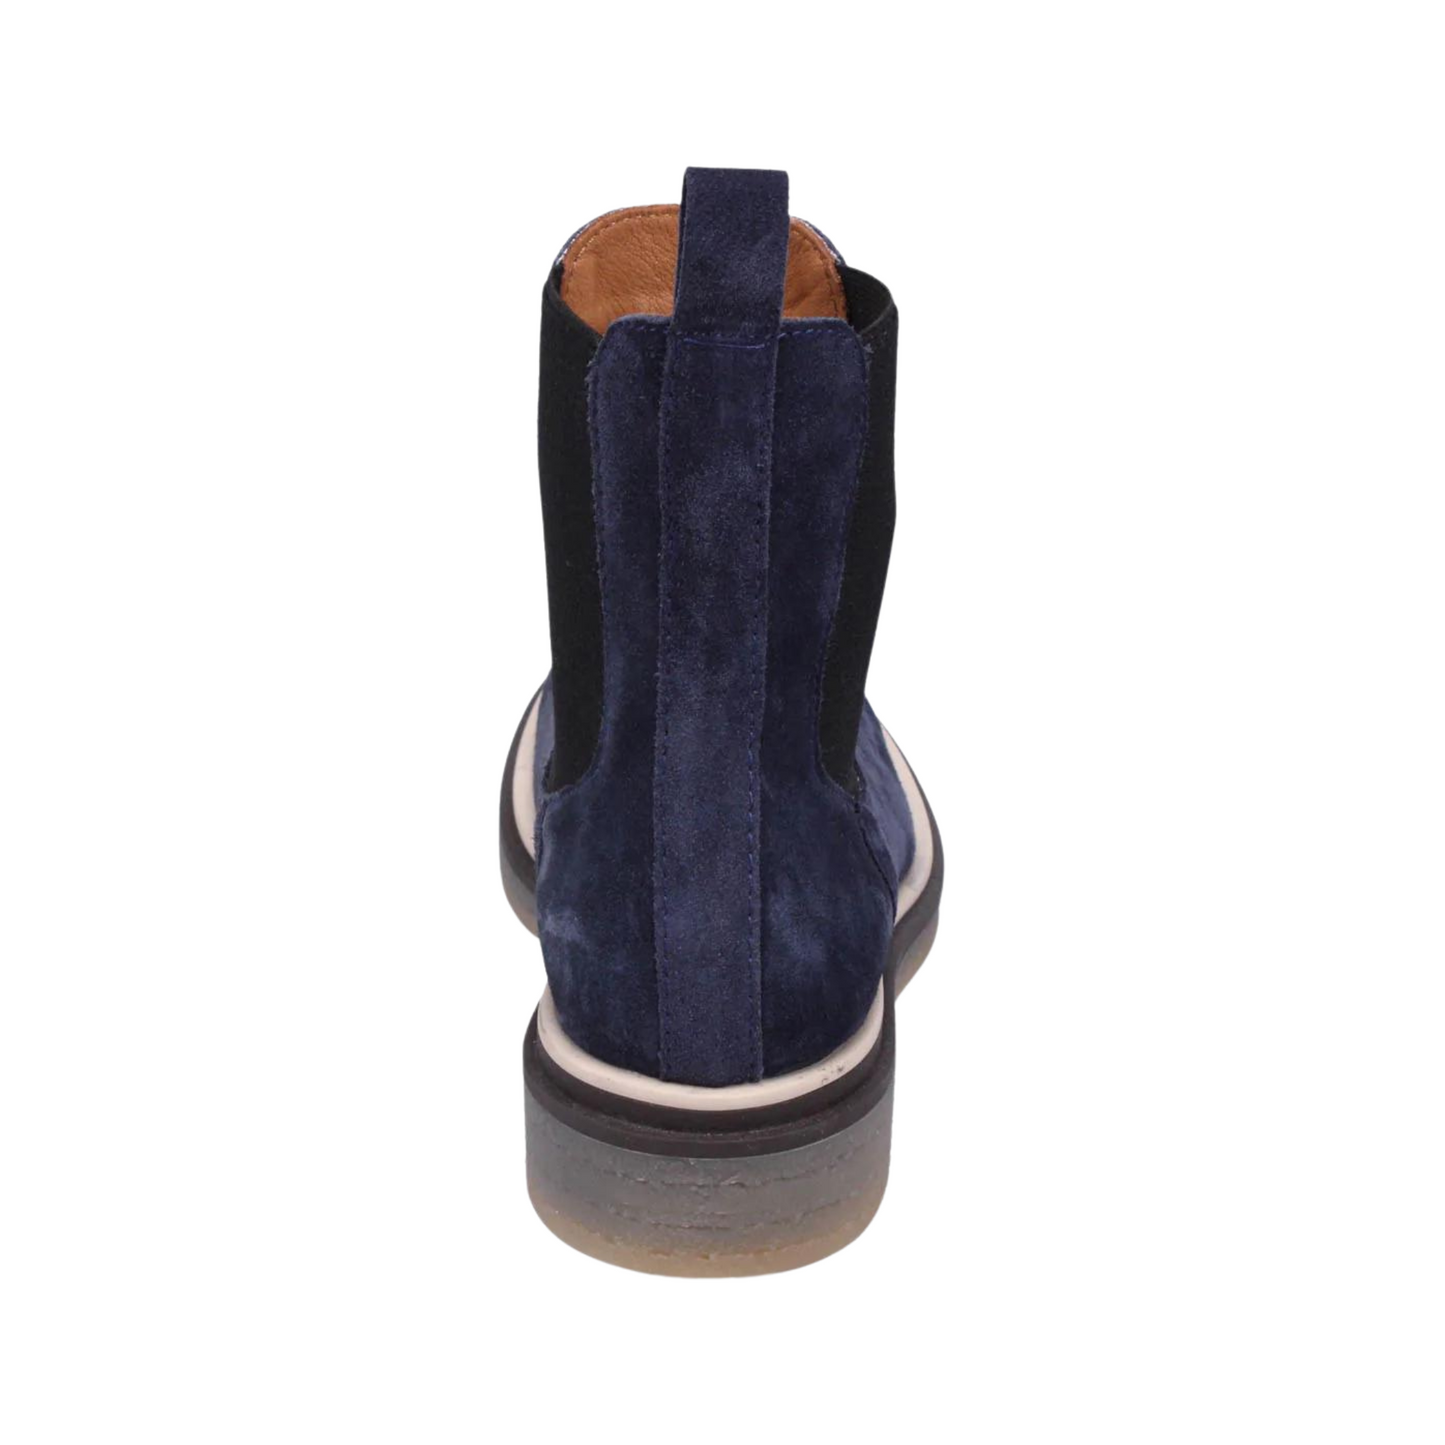 A back view of a navy suede Chelsea boot.